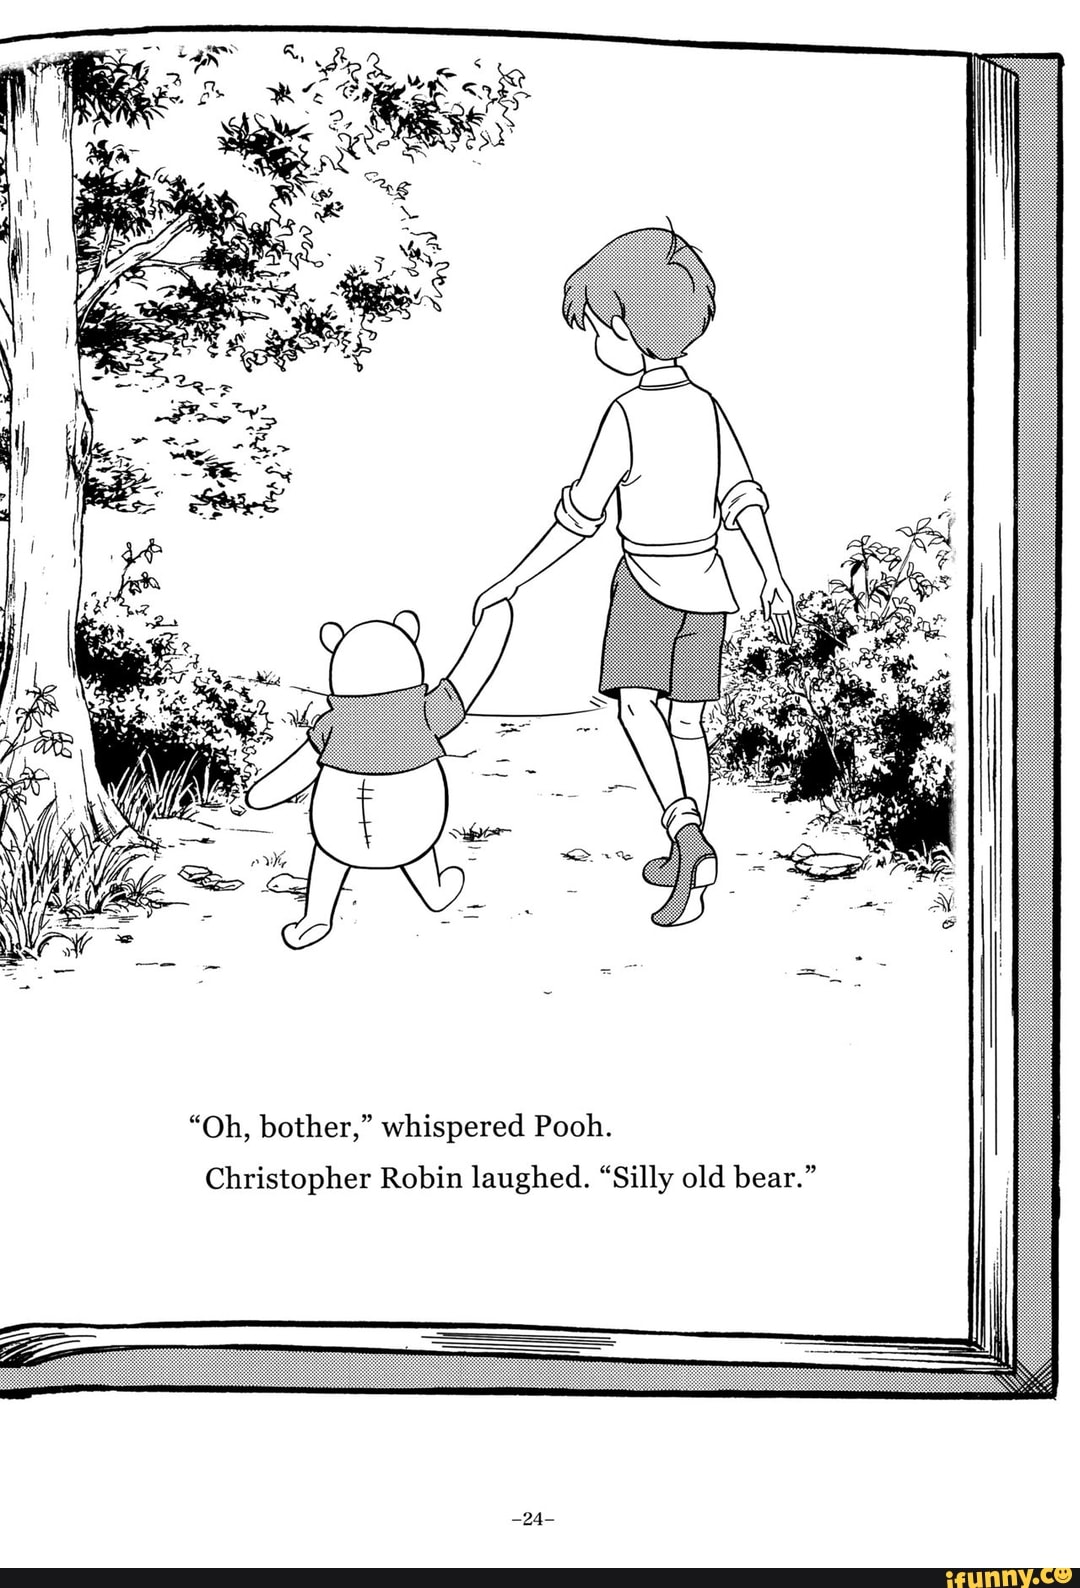 Christopher Robin laughed. 